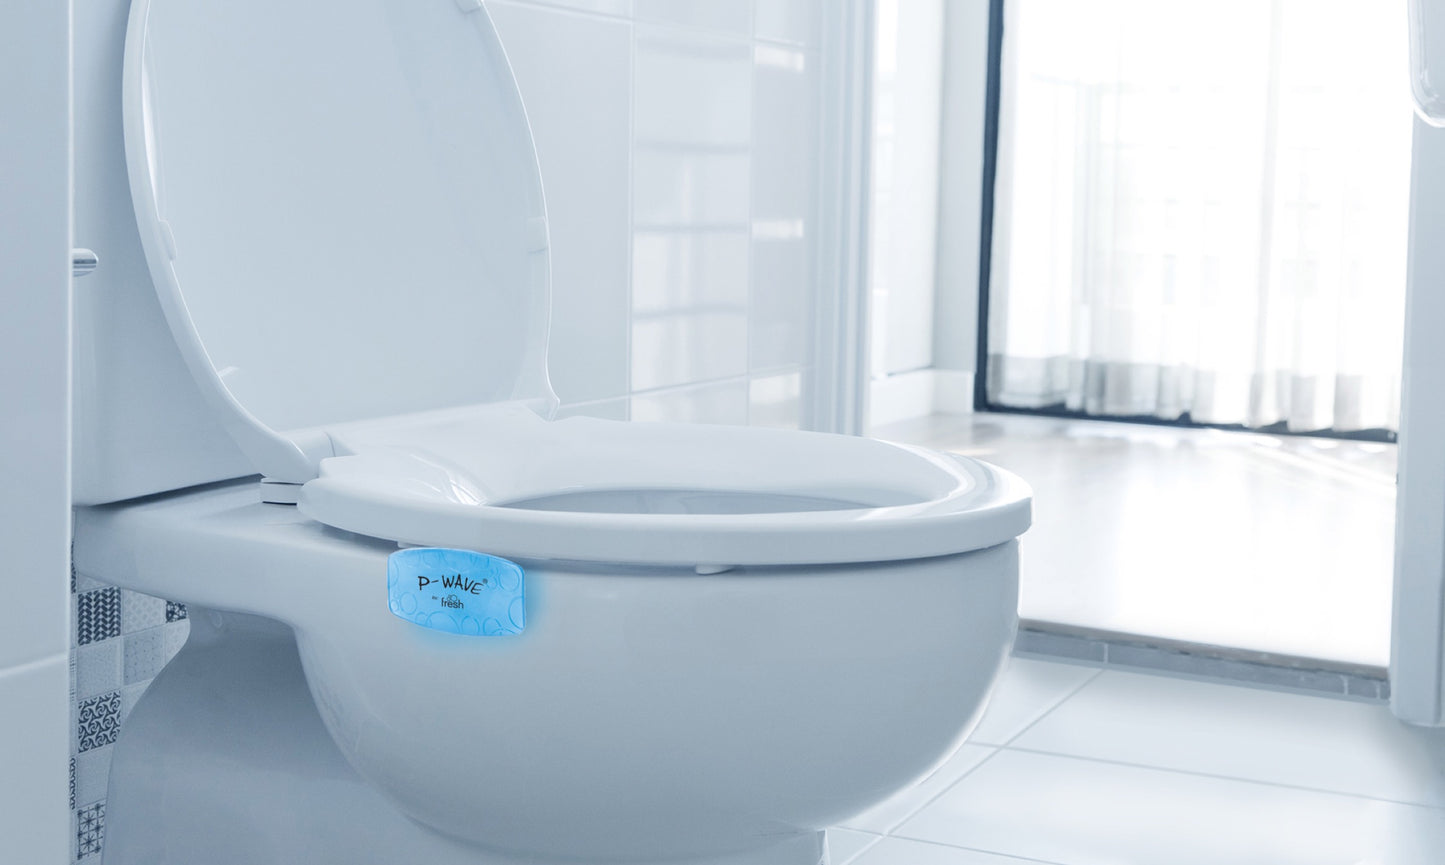 A blue Ocean Mist fragranced Bowl Clip in use on the outside of a toilet rim, under the lower seat